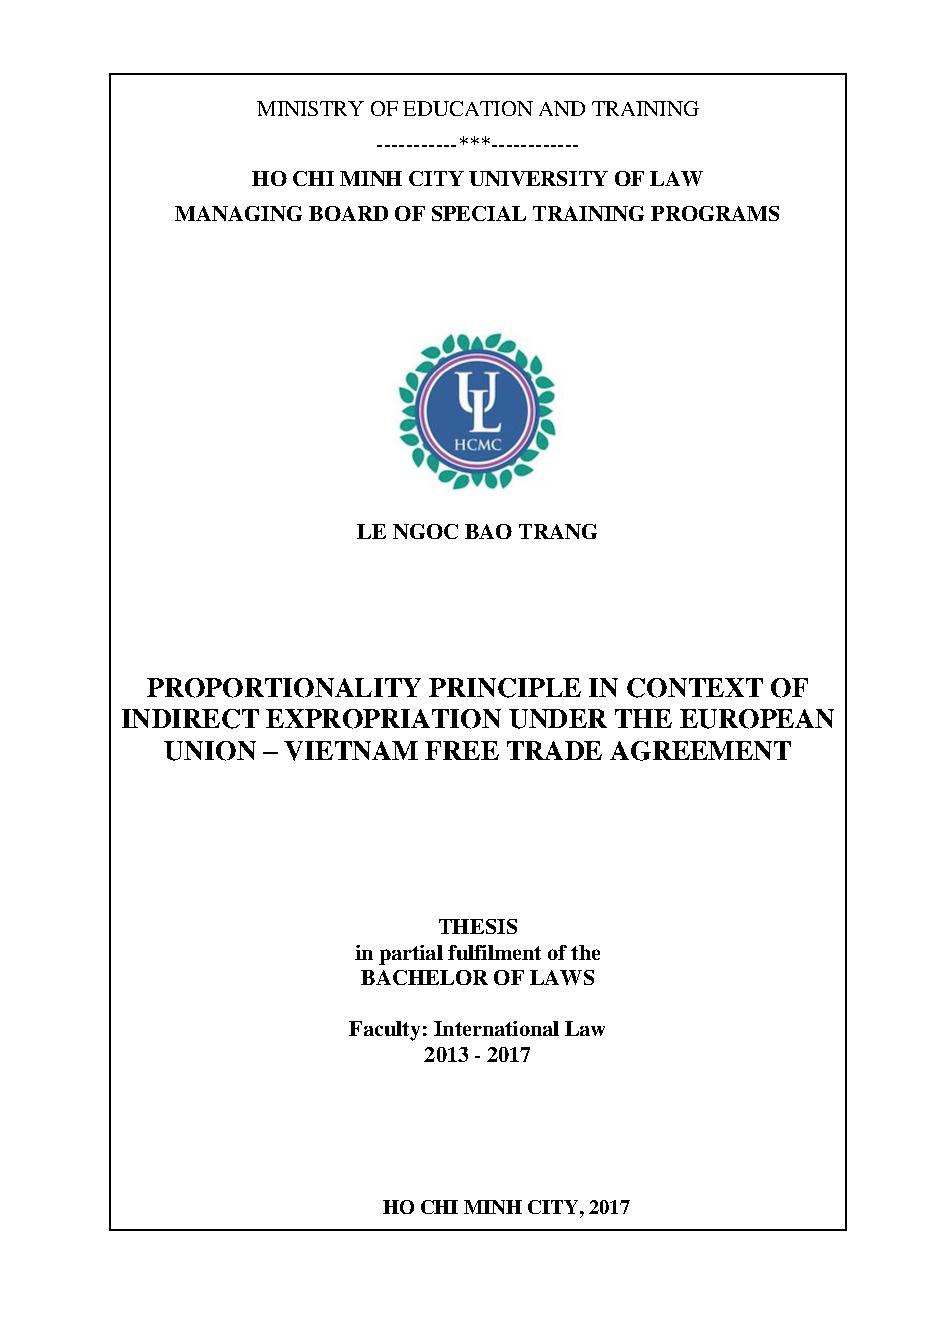 Proportionality principle in context of indirect expropropriation under the European union - VietNam free trade agreement .